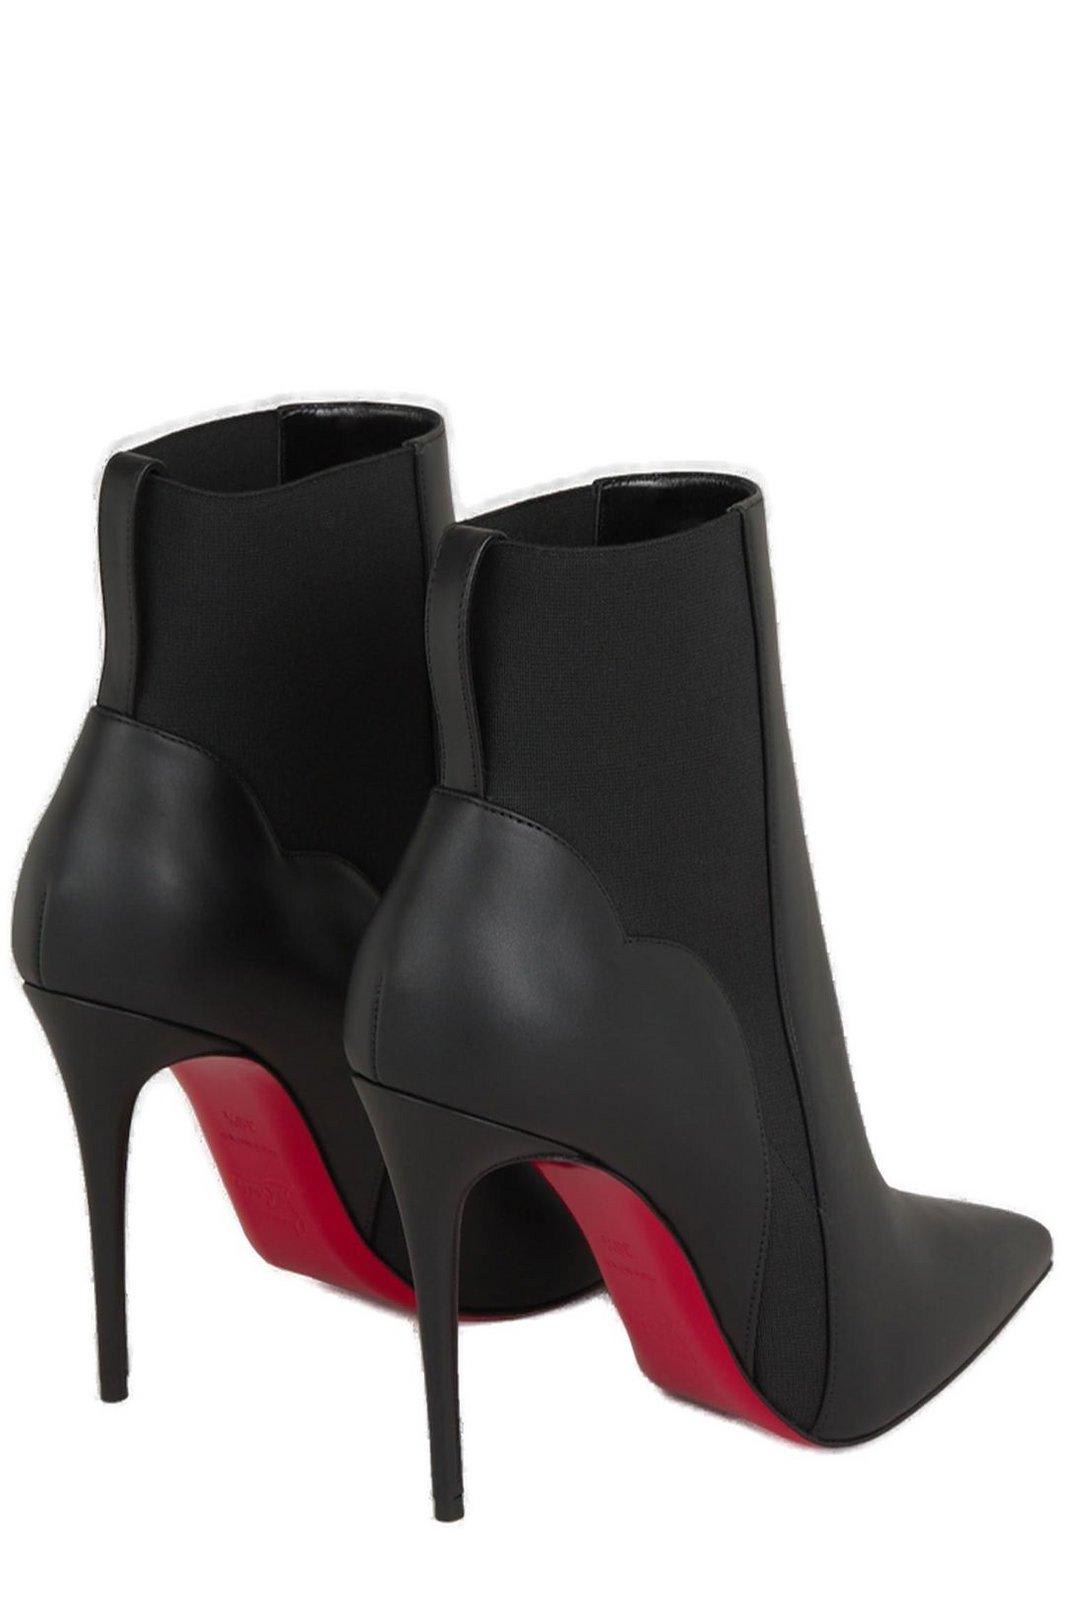 Christian Louboutin Chelsea Chick Booty Leather Boots